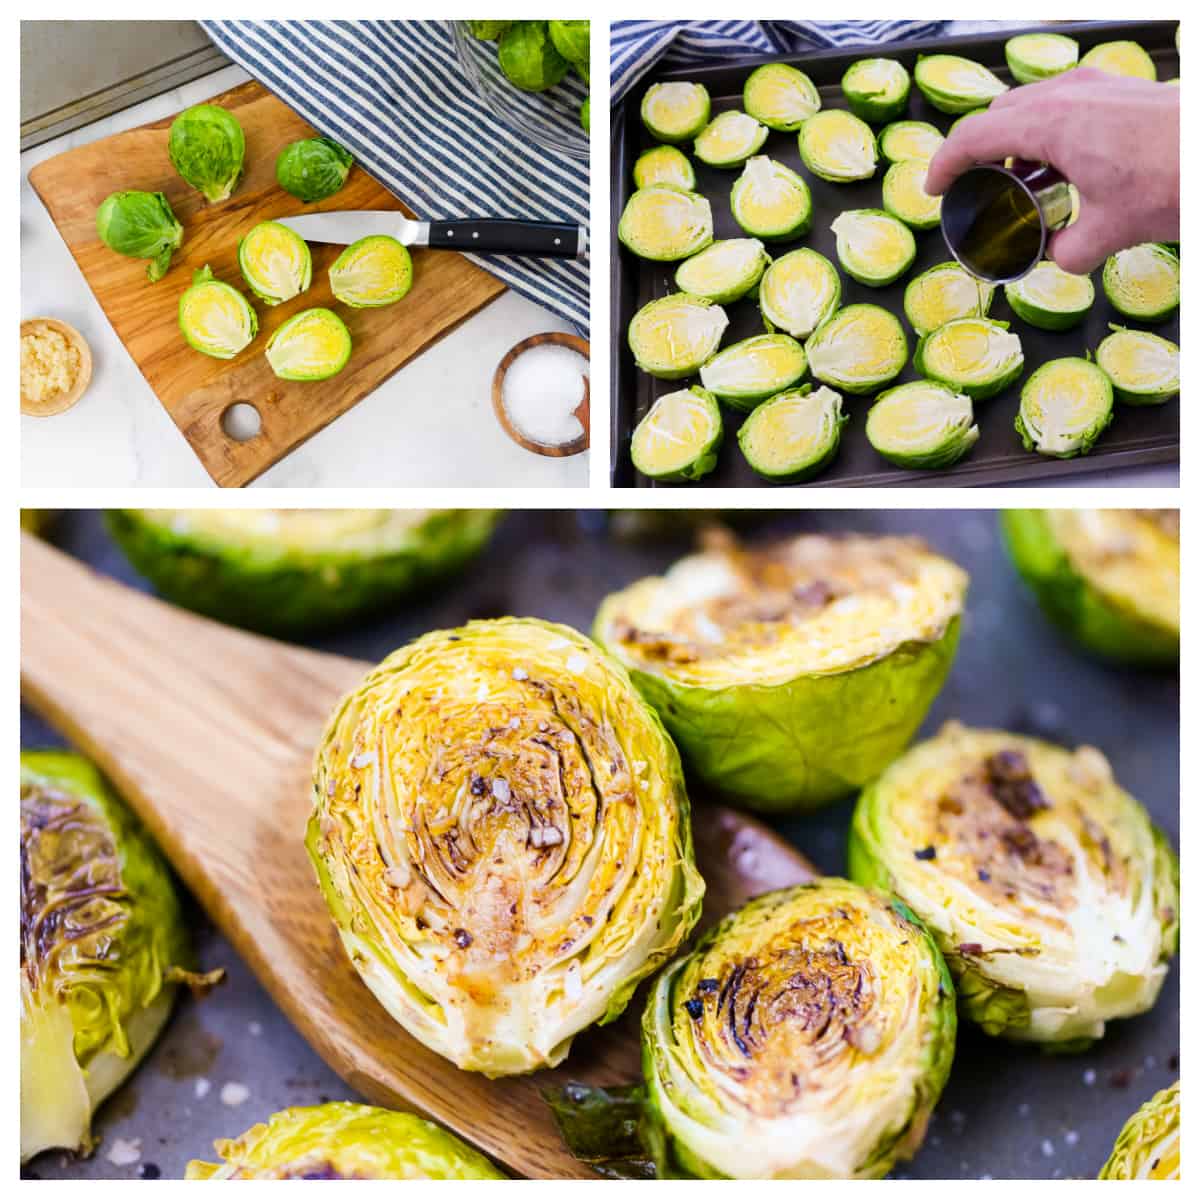 Collage showing how to make roasted brussels sprouts.